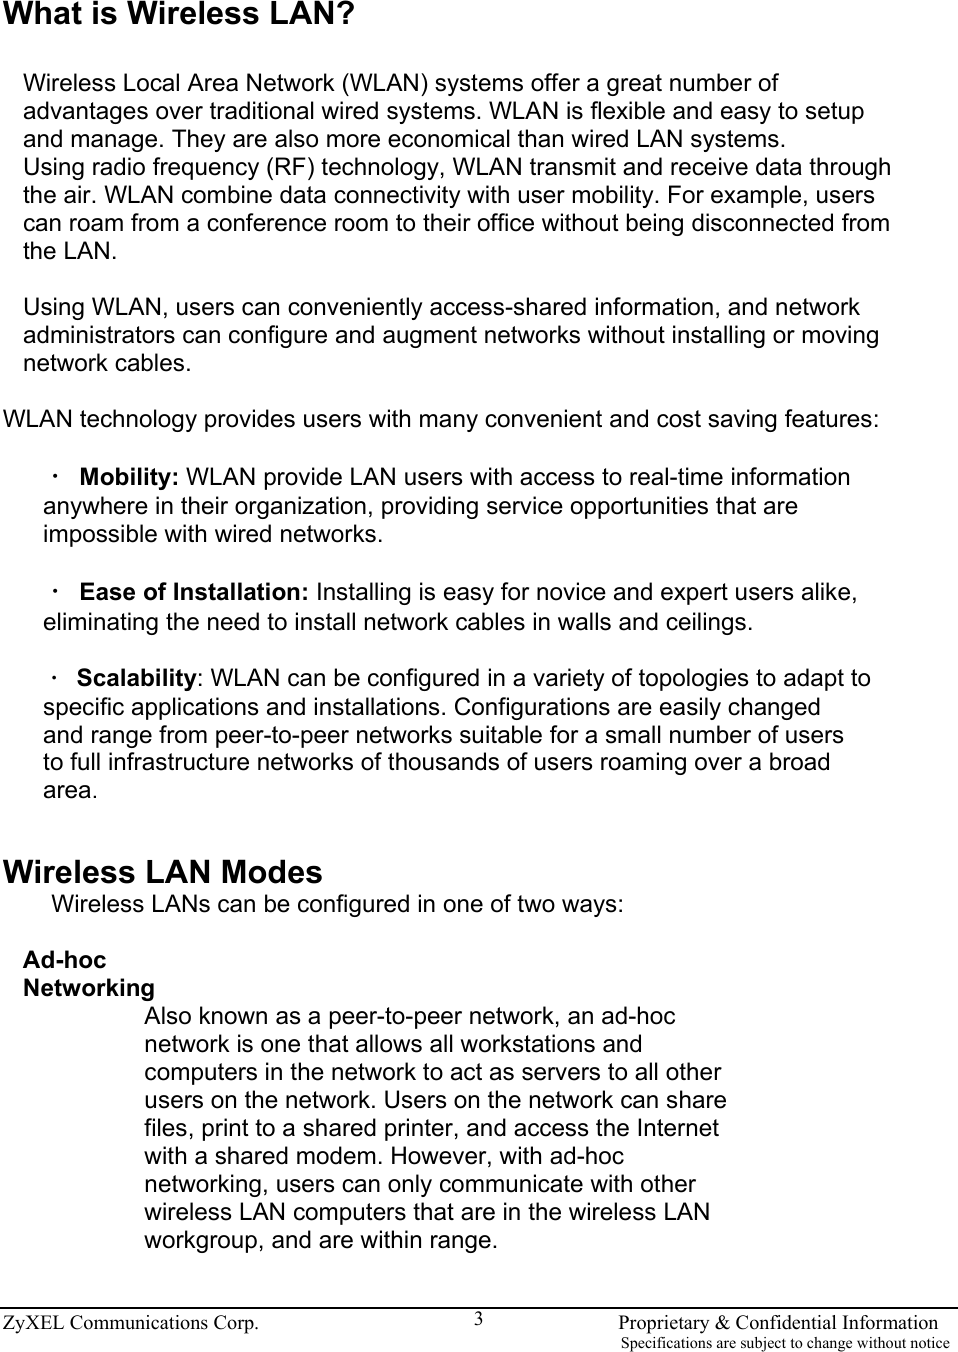  ZyXEL Communications Corp.                                                                       Proprietary &amp; Confidential Information                                                                                                                           Specifications are subject to change without notice 3 What is Wireless LAN?  Wireless Local Area Network (WLAN) systems offer a great number of advantages over traditional wired systems. WLAN is flexible and easy to setup and manage. They are also more economical than wired LAN systems. Using radio frequency (RF) technology, WLAN transmit and receive data through the air. WLAN combine data connectivity with user mobility. For example, users can roam from a conference room to their office without being disconnected from the LAN.  Using WLAN, users can conveniently access-shared information, and network administrators can configure and augment networks without installing or moving network cables.  WLAN technology provides users with many convenient and cost saving features:  ‧ Mobility: WLAN provide LAN users with access to real-time information anywhere in their organization, providing service opportunities that are impossible with wired networks.  ‧ Ease of Installation: Installing is easy for novice and expert users alike, eliminating the need to install network cables in walls and ceilings.  ‧ Scalability: WLAN can be configured in a variety of topologies to adapt to specific applications and installations. Configurations are easily changed and range from peer-to-peer networks suitable for a small number of users to full infrastructure networks of thousands of users roaming over a broad area.   Wireless LAN Modes Wireless LANs can be configured in one of two ways:  Ad-hoc Networking Also known as a peer-to-peer network, an ad-hoc network is one that allows all workstations and computers in the network to act as servers to all other users on the network. Users on the network can share files, print to a shared printer, and access the Internet with a shared modem. However, with ad-hoc networking, users can only communicate with other wireless LAN computers that are in the wireless LAN workgroup, and are within range.  